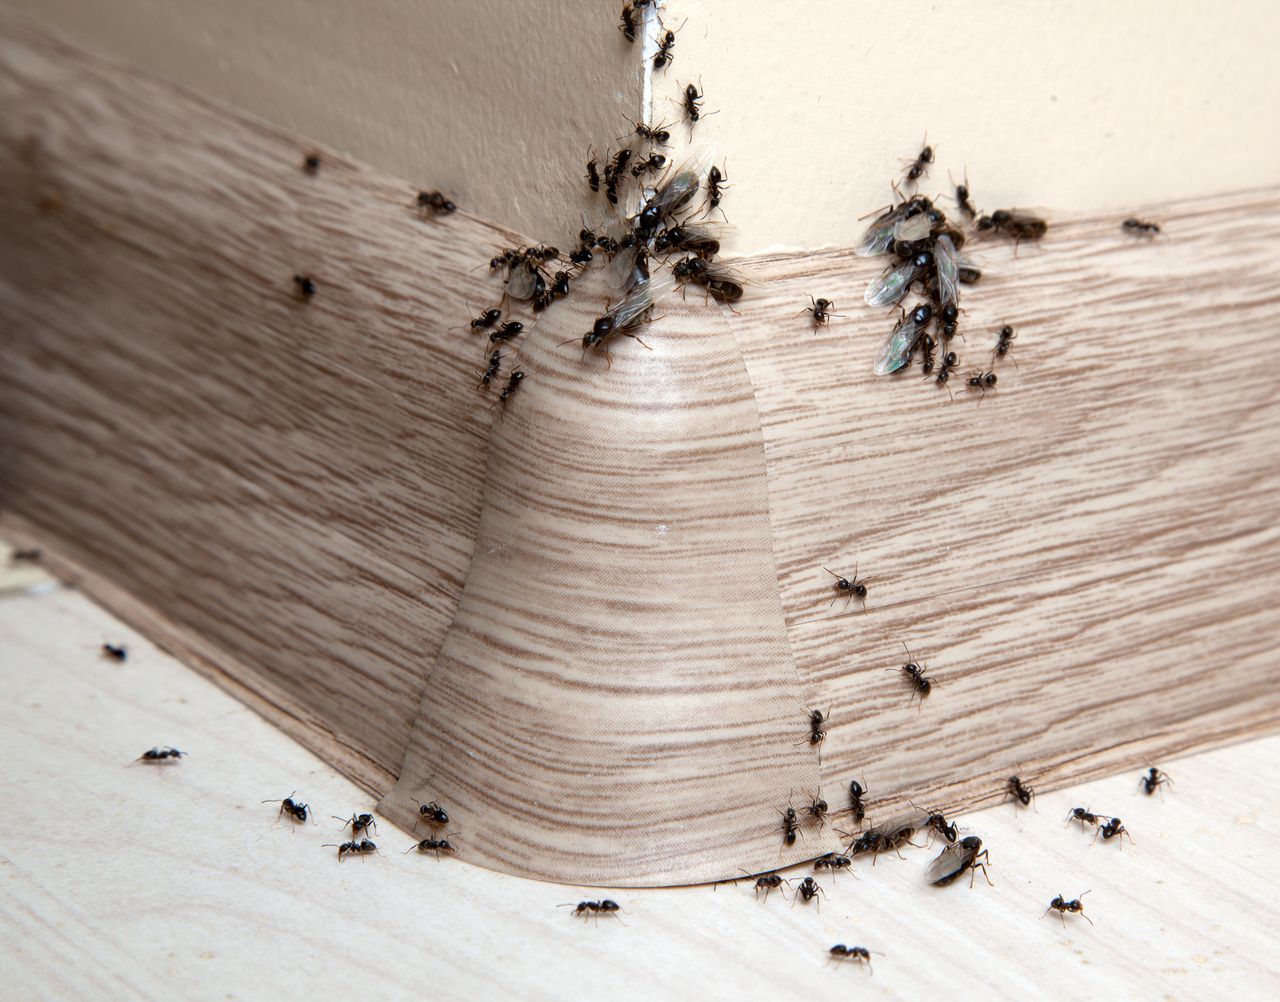 Use vinegar, salt, and coffee to humbly evict ants from your home and garden